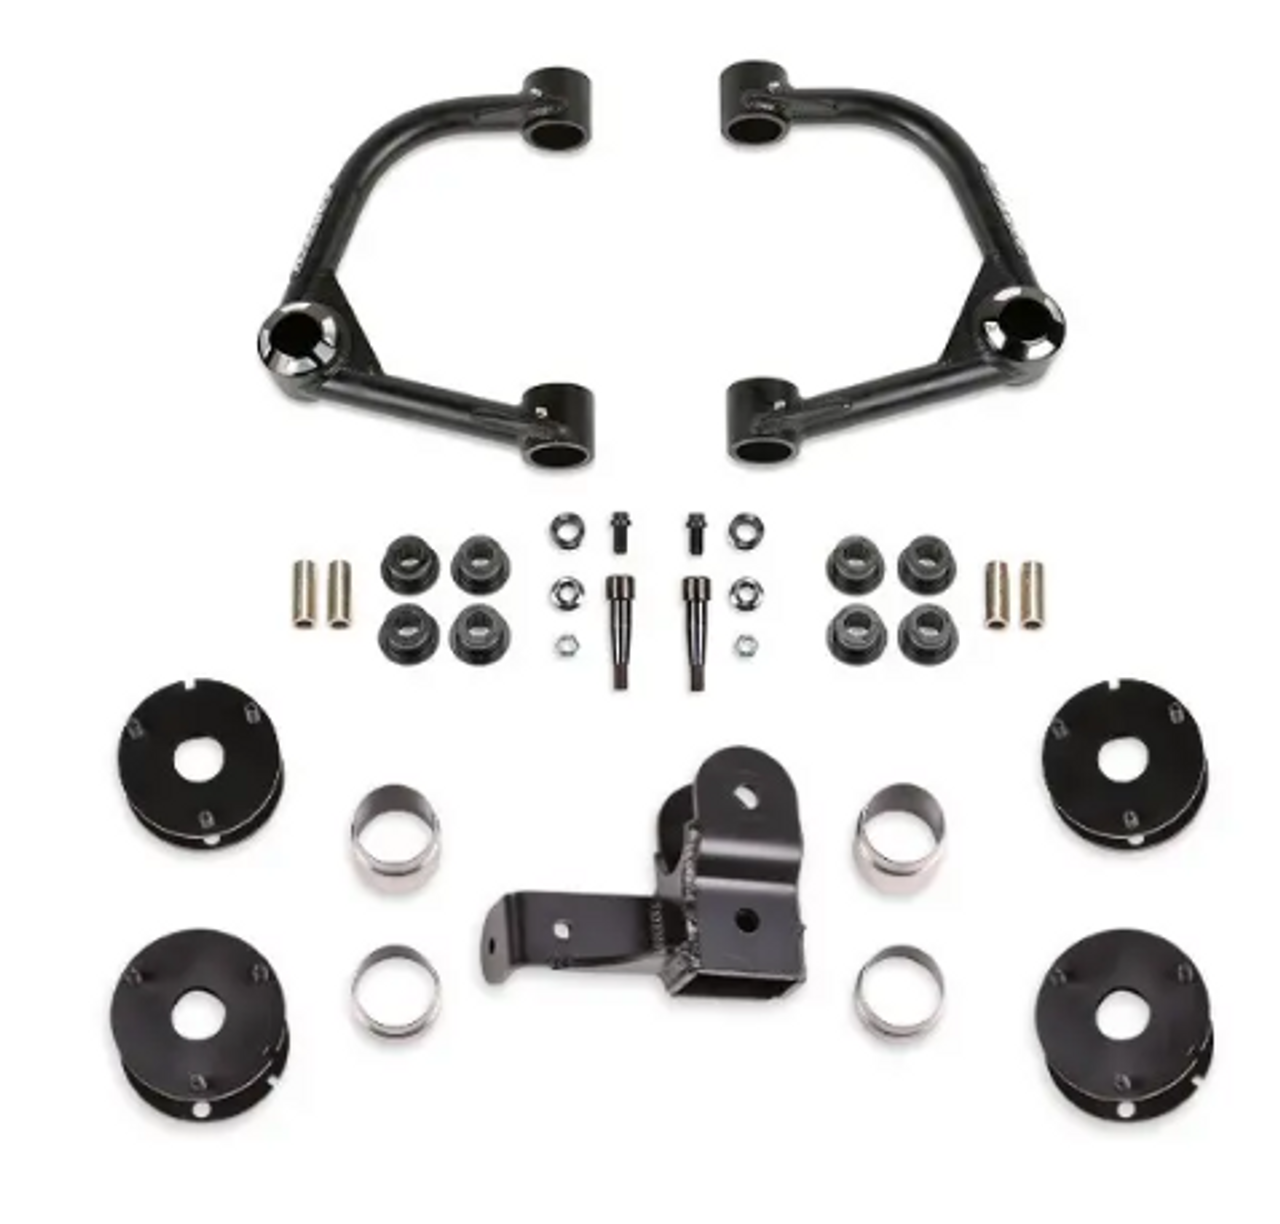 FabTech K2384 4" Uniball UCA Lift Kit with Front & Rear Shock Spacers for Ford Bronco 2021+